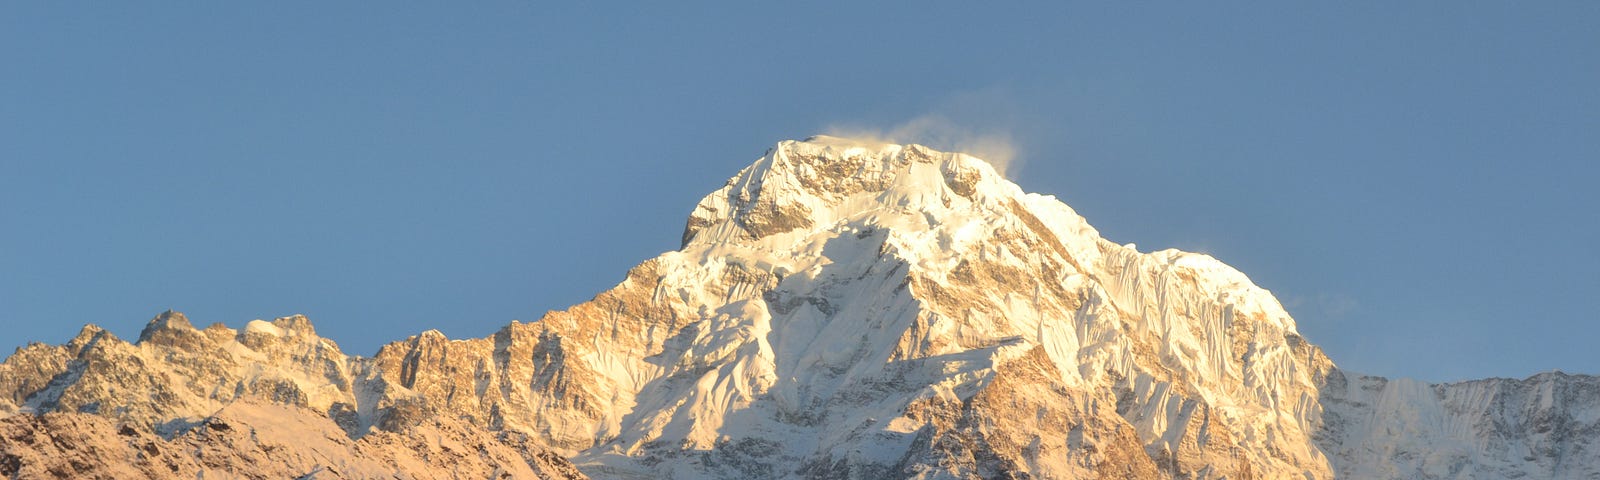 A close-up view of a snow-capped mountain with sunlight reflecting off the peak.